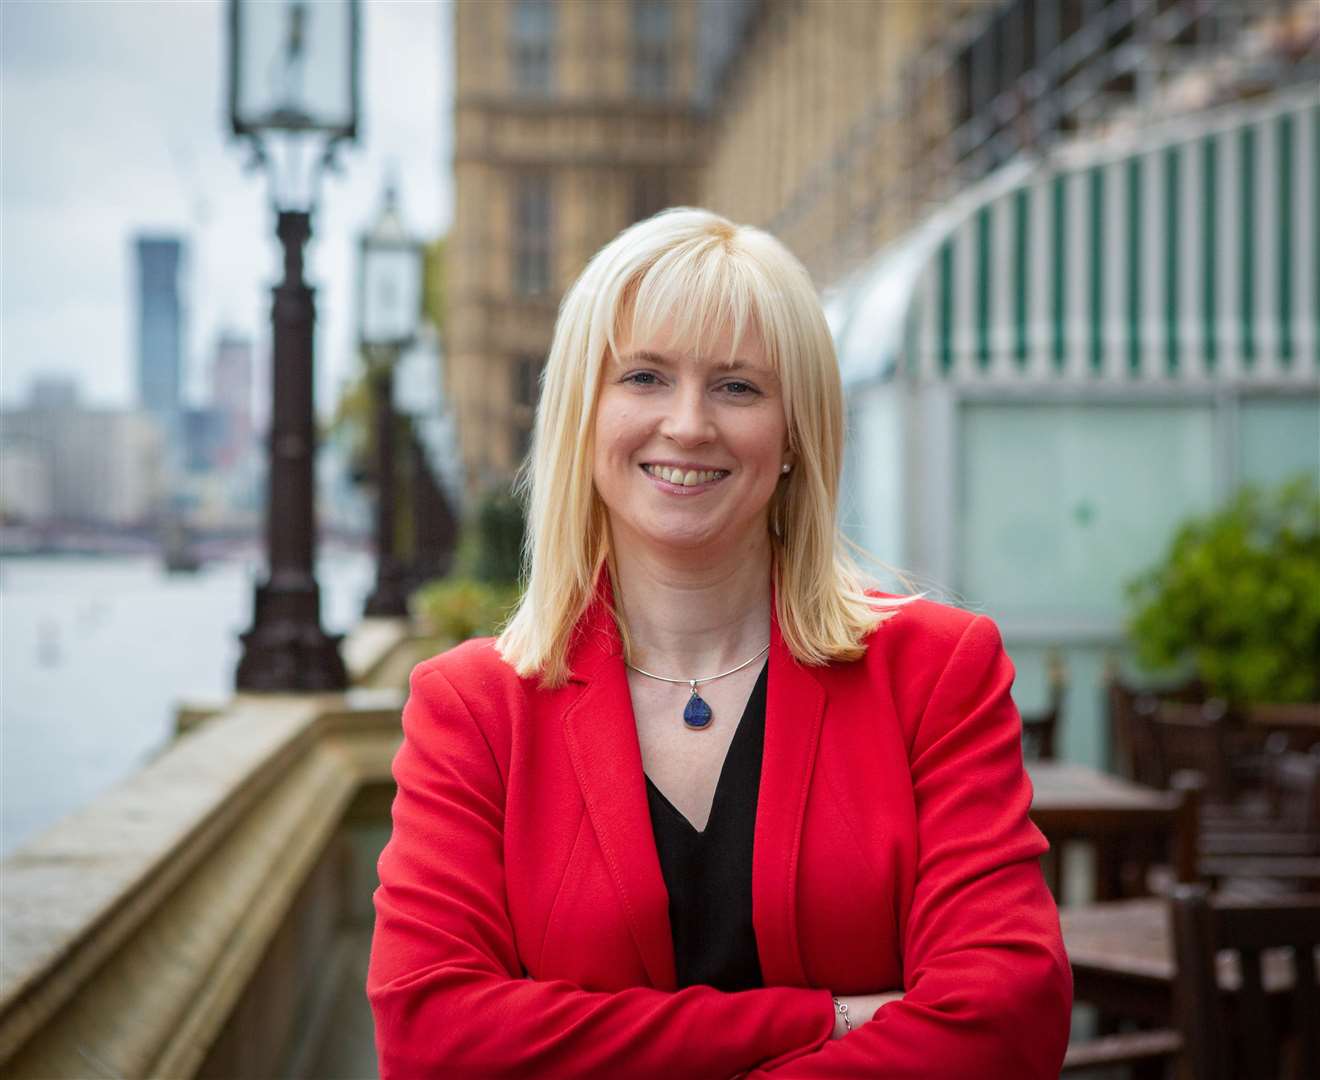 Mr Prew's decision may have an impact on Labour candidate Rosie Duffield's chances of retaining the seat she won in 2017.